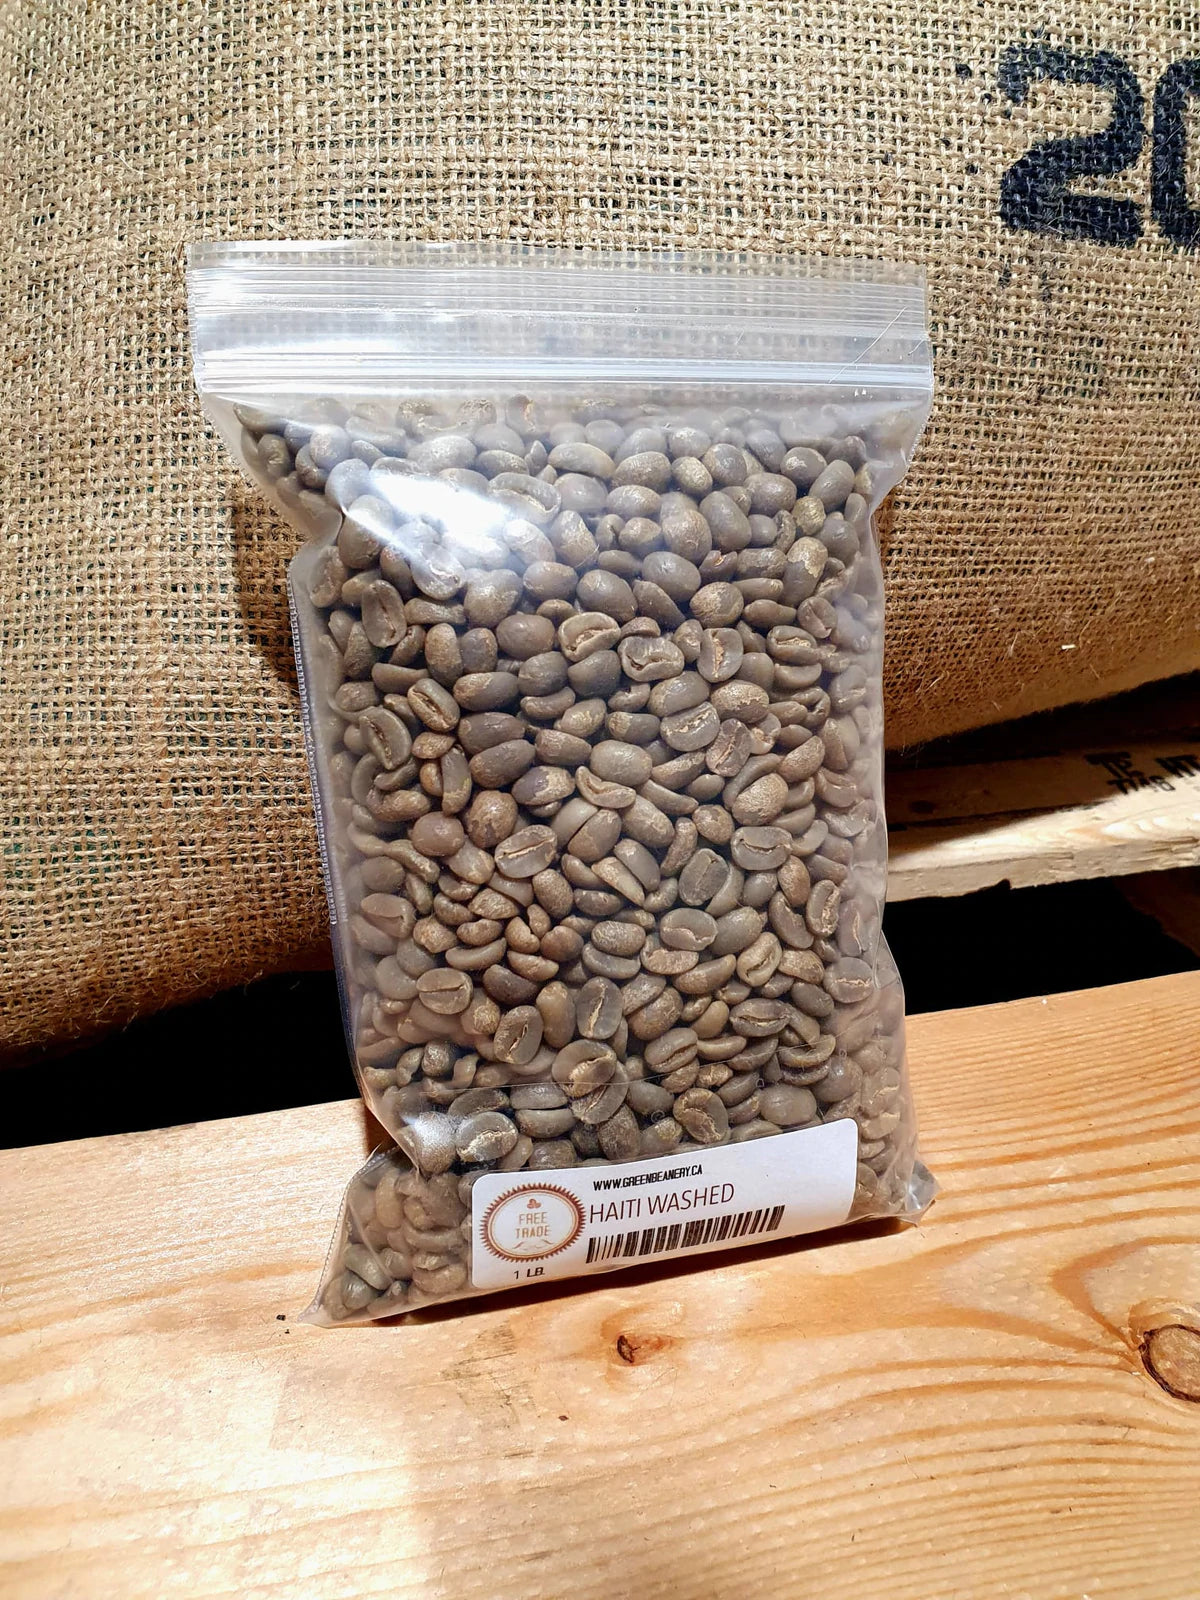 Unroasted - Haiti Washed (Coffee of the Week)